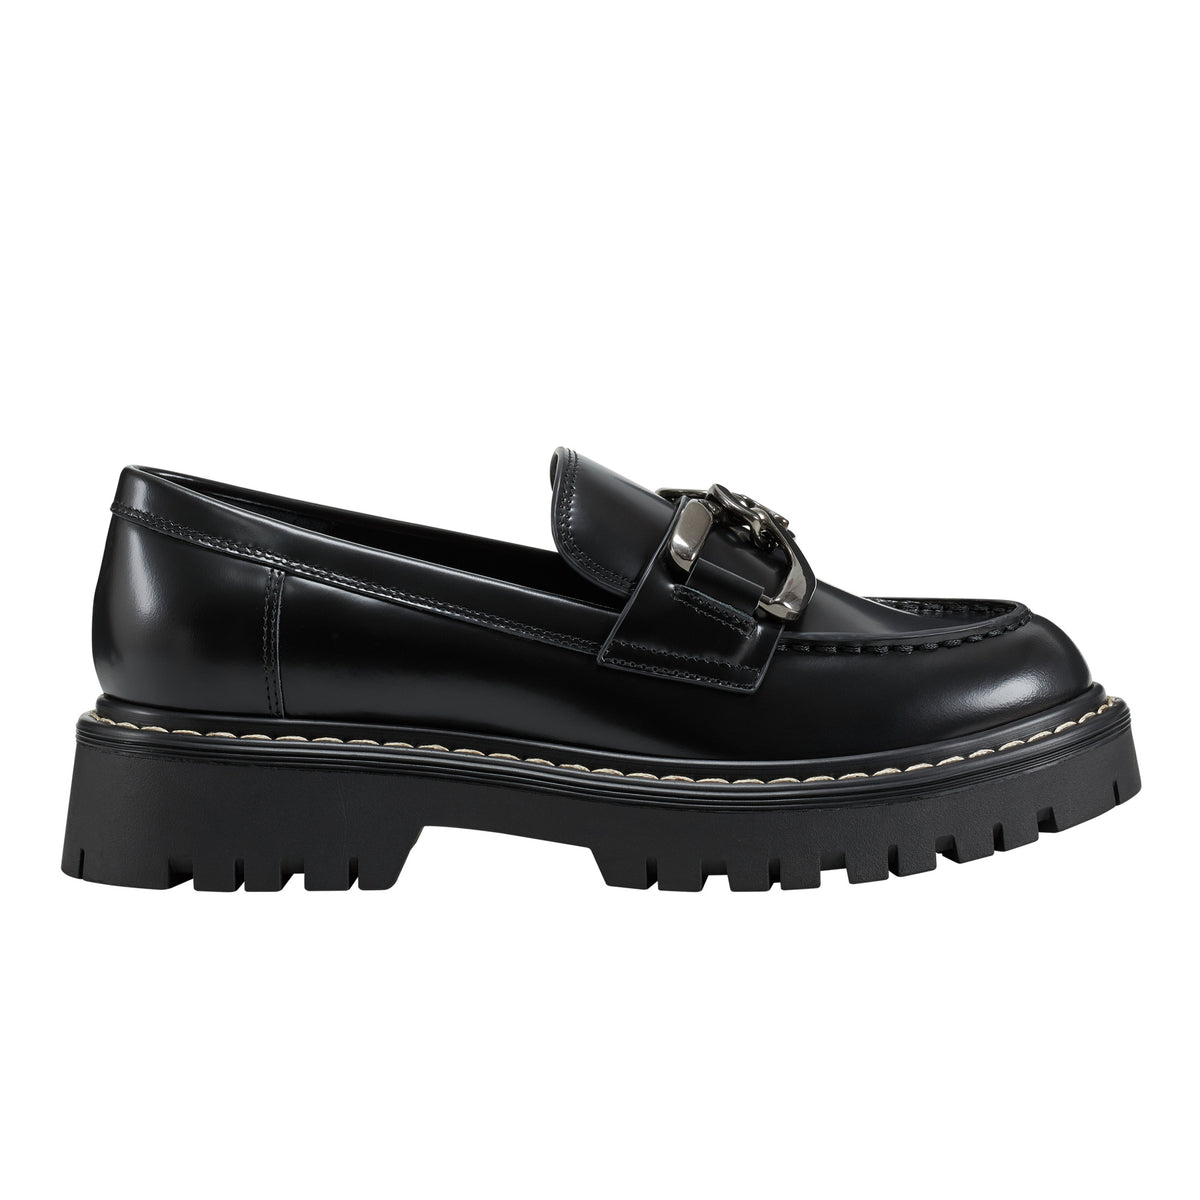 Trisca Lug Sole Chain Loafer